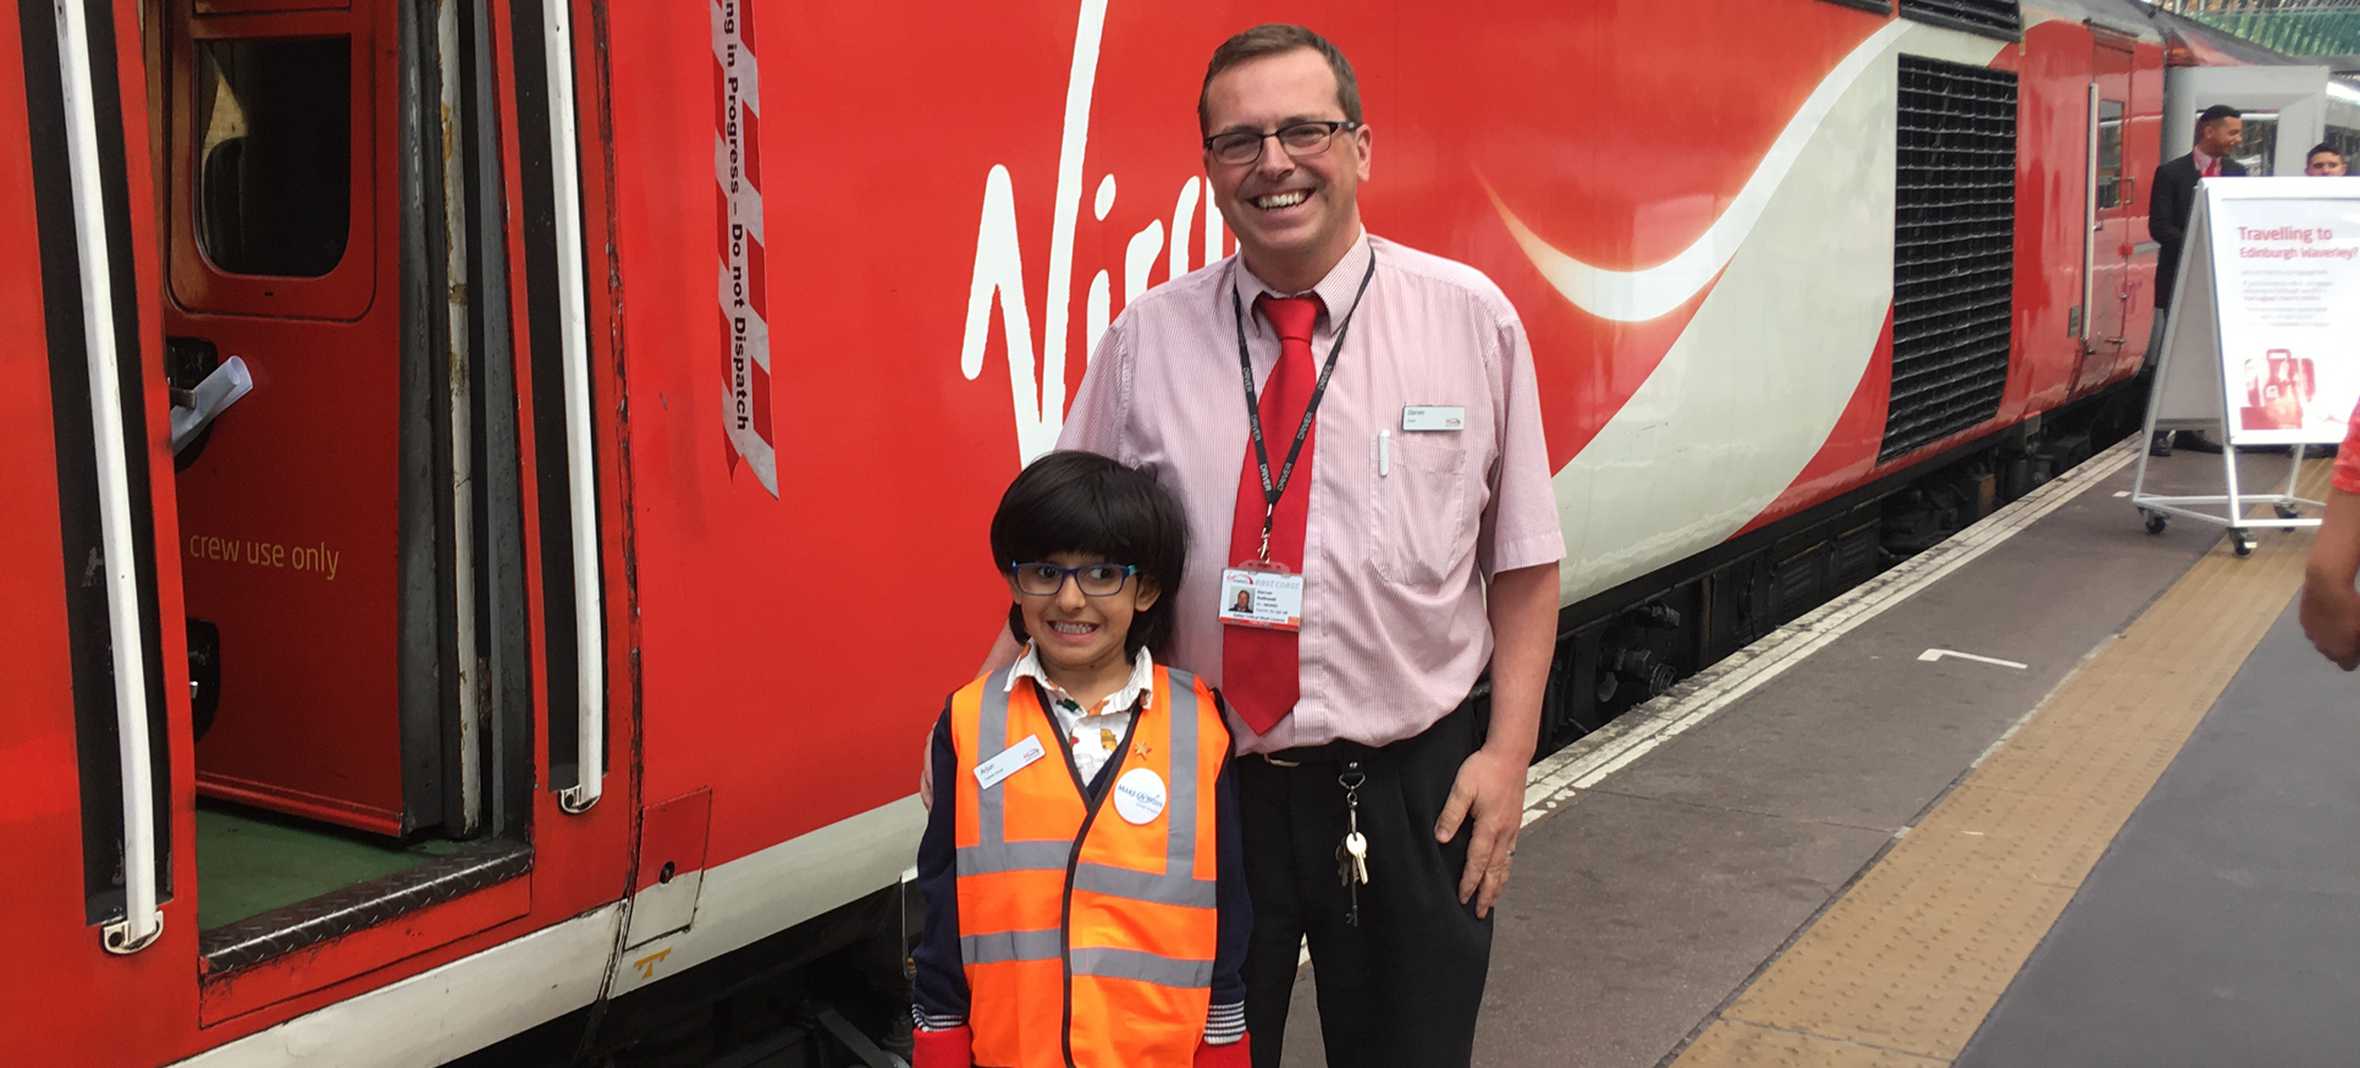 Arjun and a member of Virgin trains staff